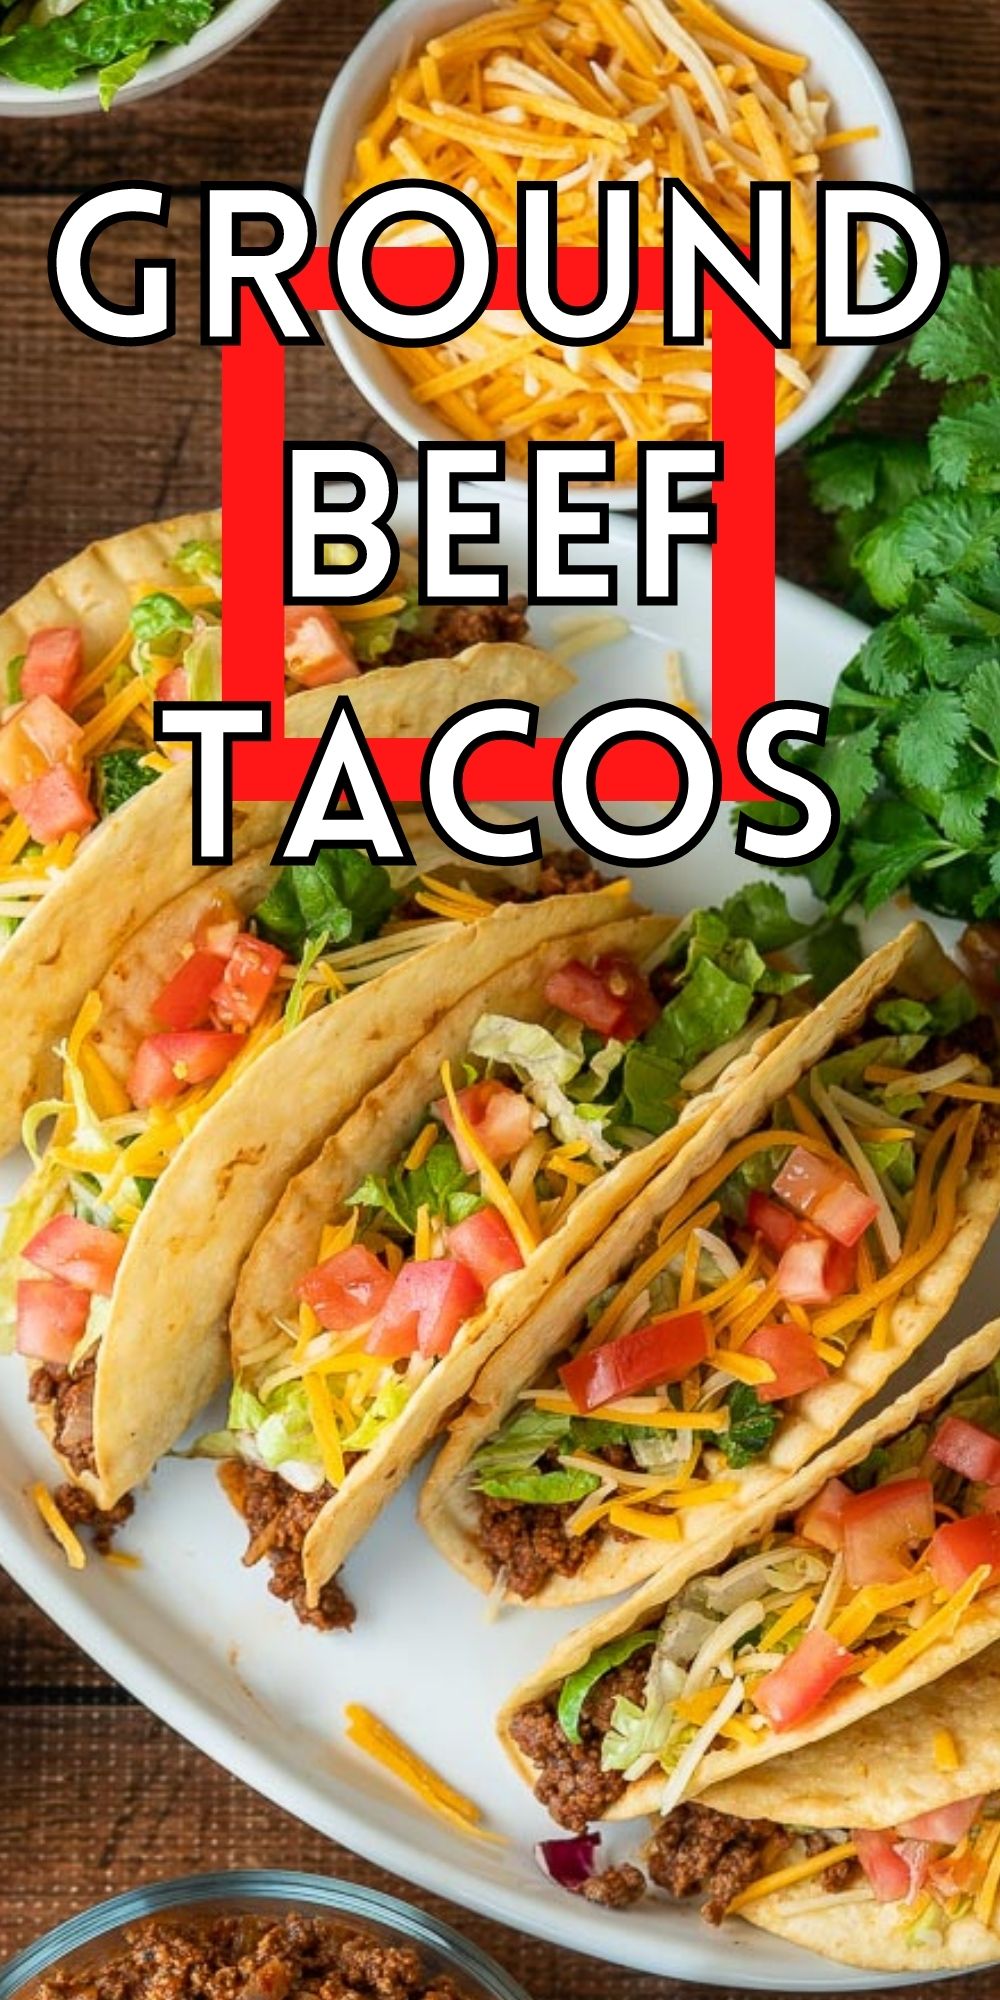 Ground Beef Tacos Recipe - I Wash You Dry